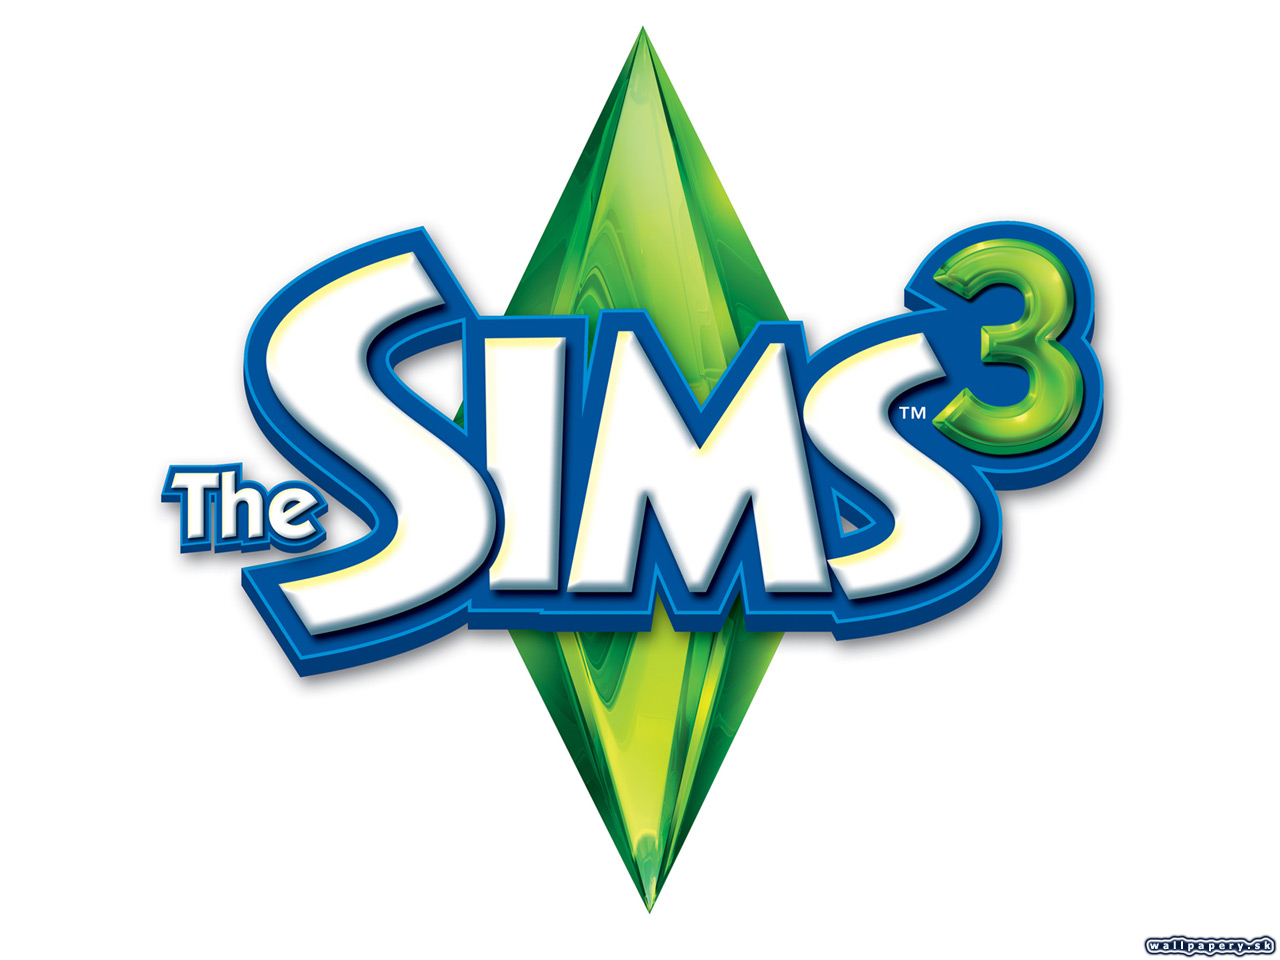 The Sims 3 - wallpaper 2